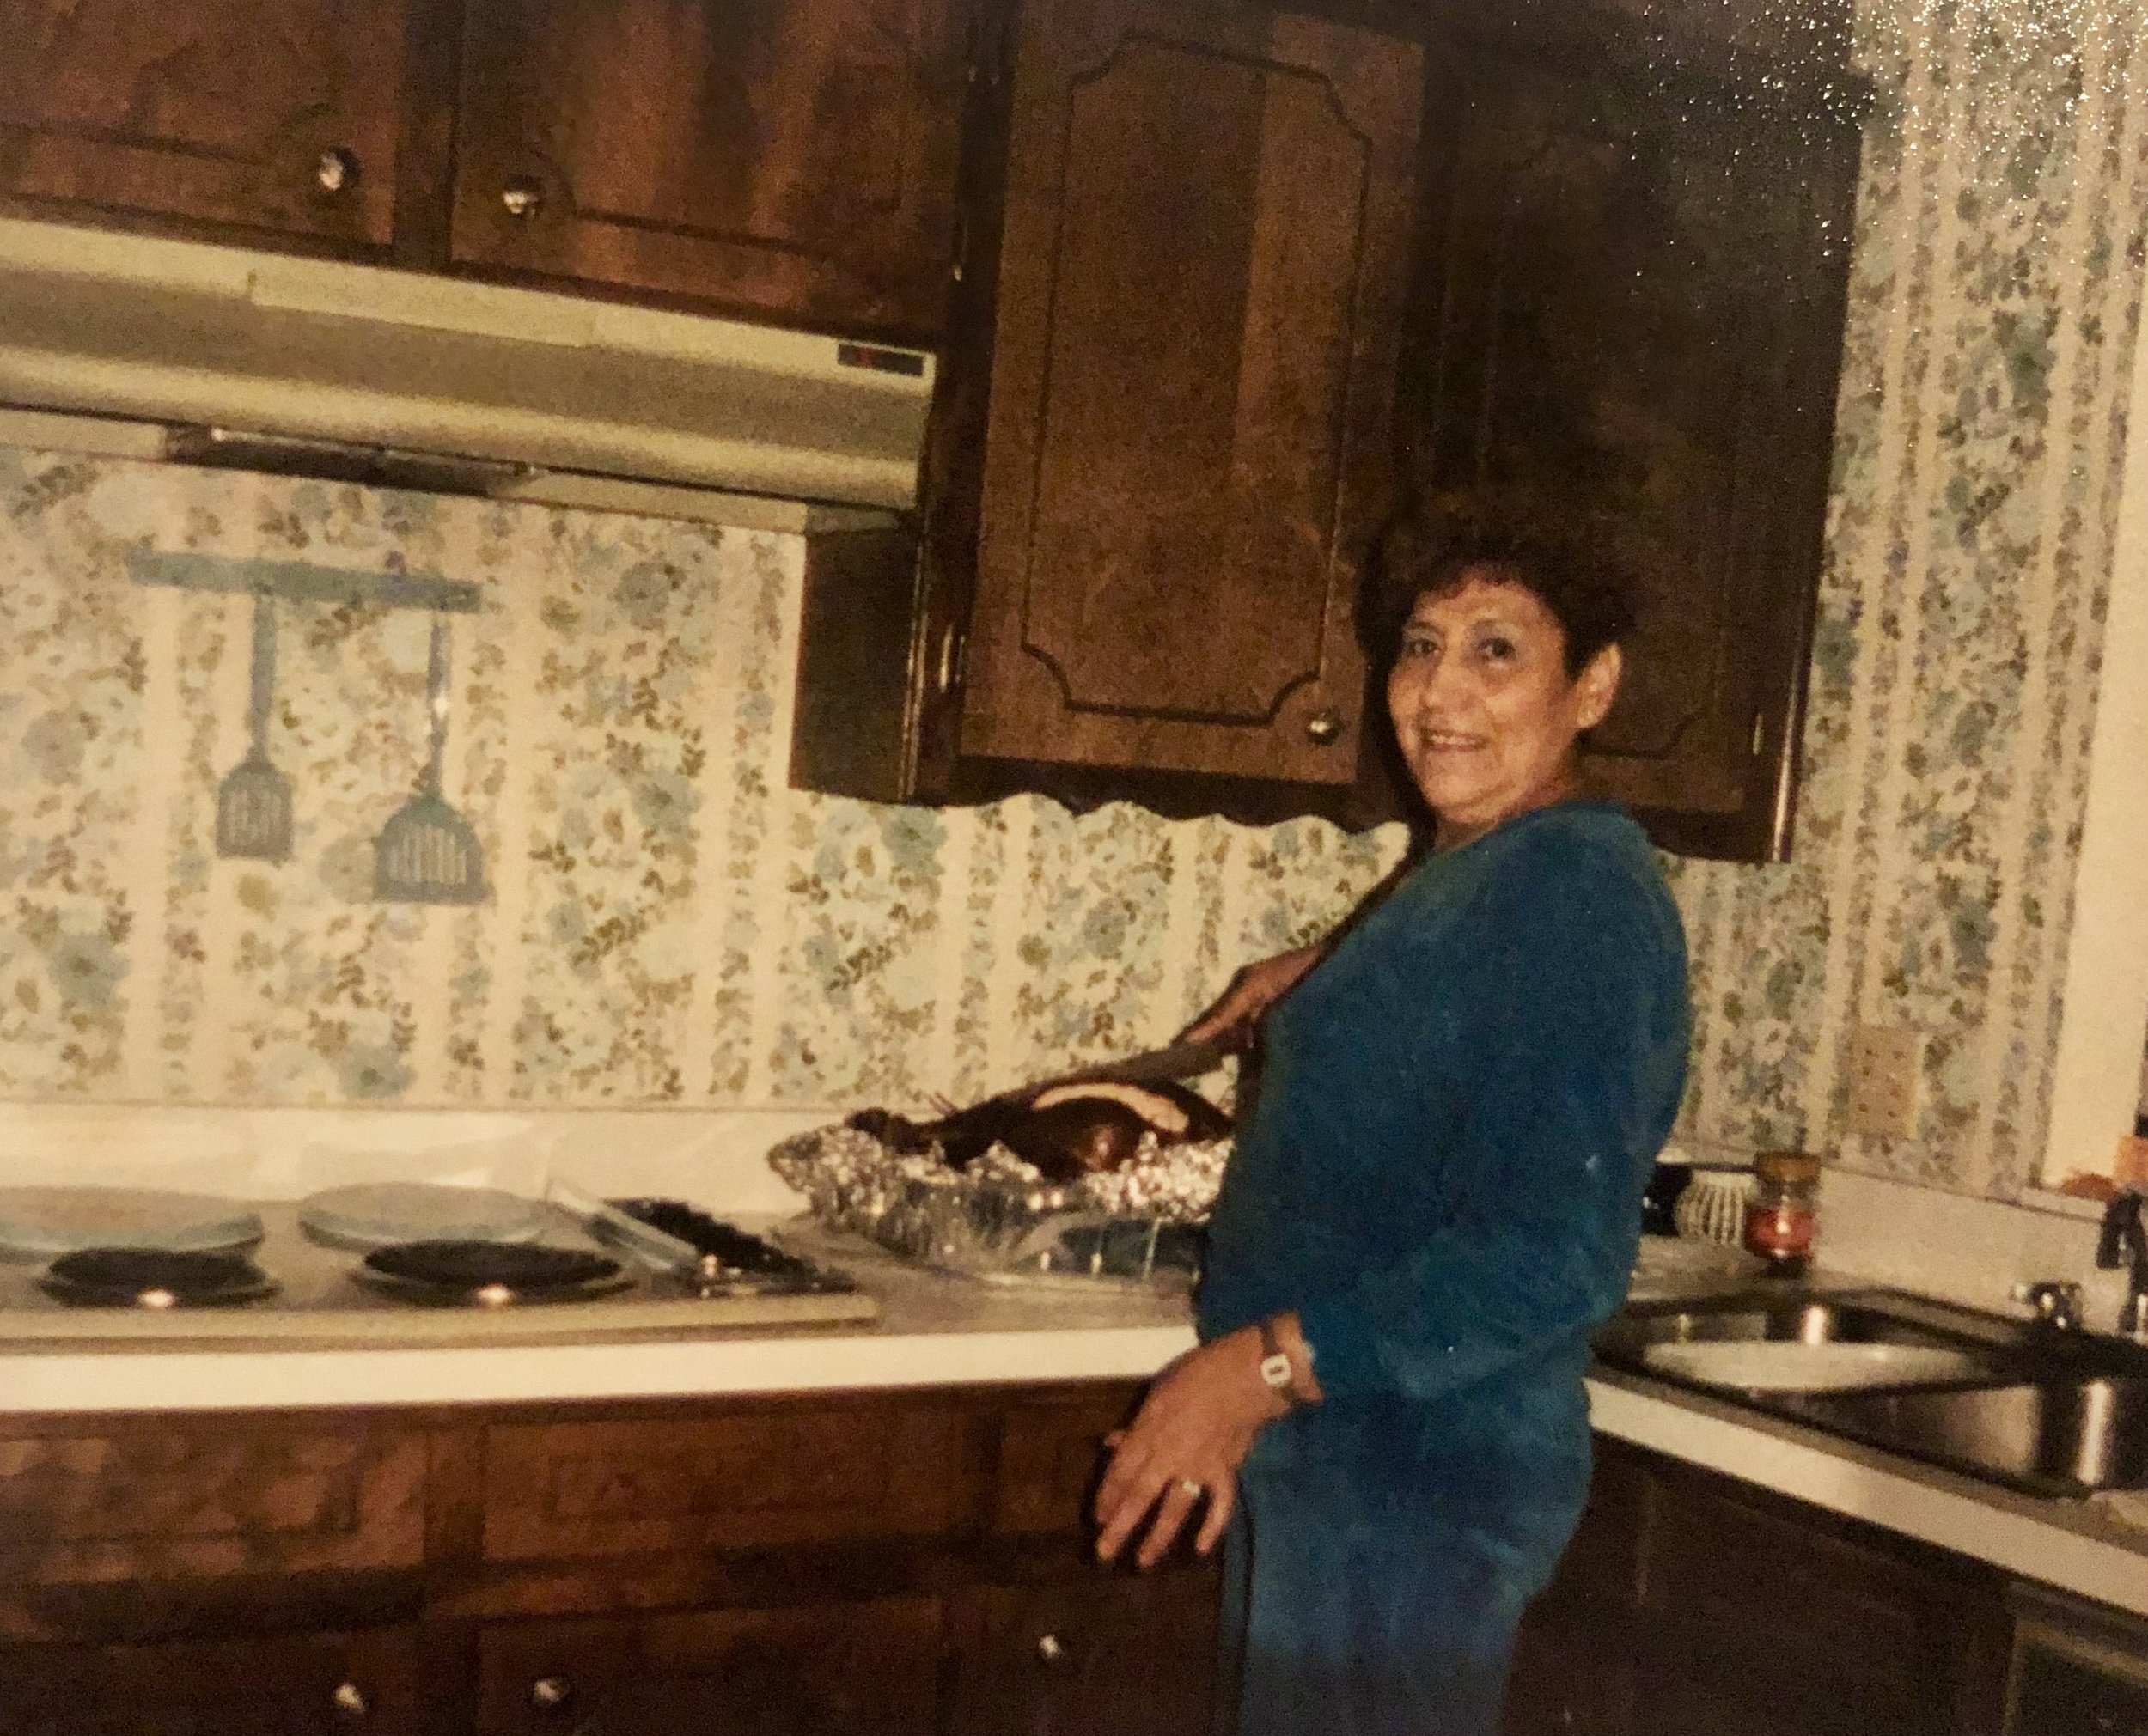    This is an old Photo of my Grandma Julia who was the matriarch of my family. I love looking at this image of her standing healthy, happy and proud of the thanksgiving meal she made. She wasn’t much for words, and these days, she doesn’t speak at a